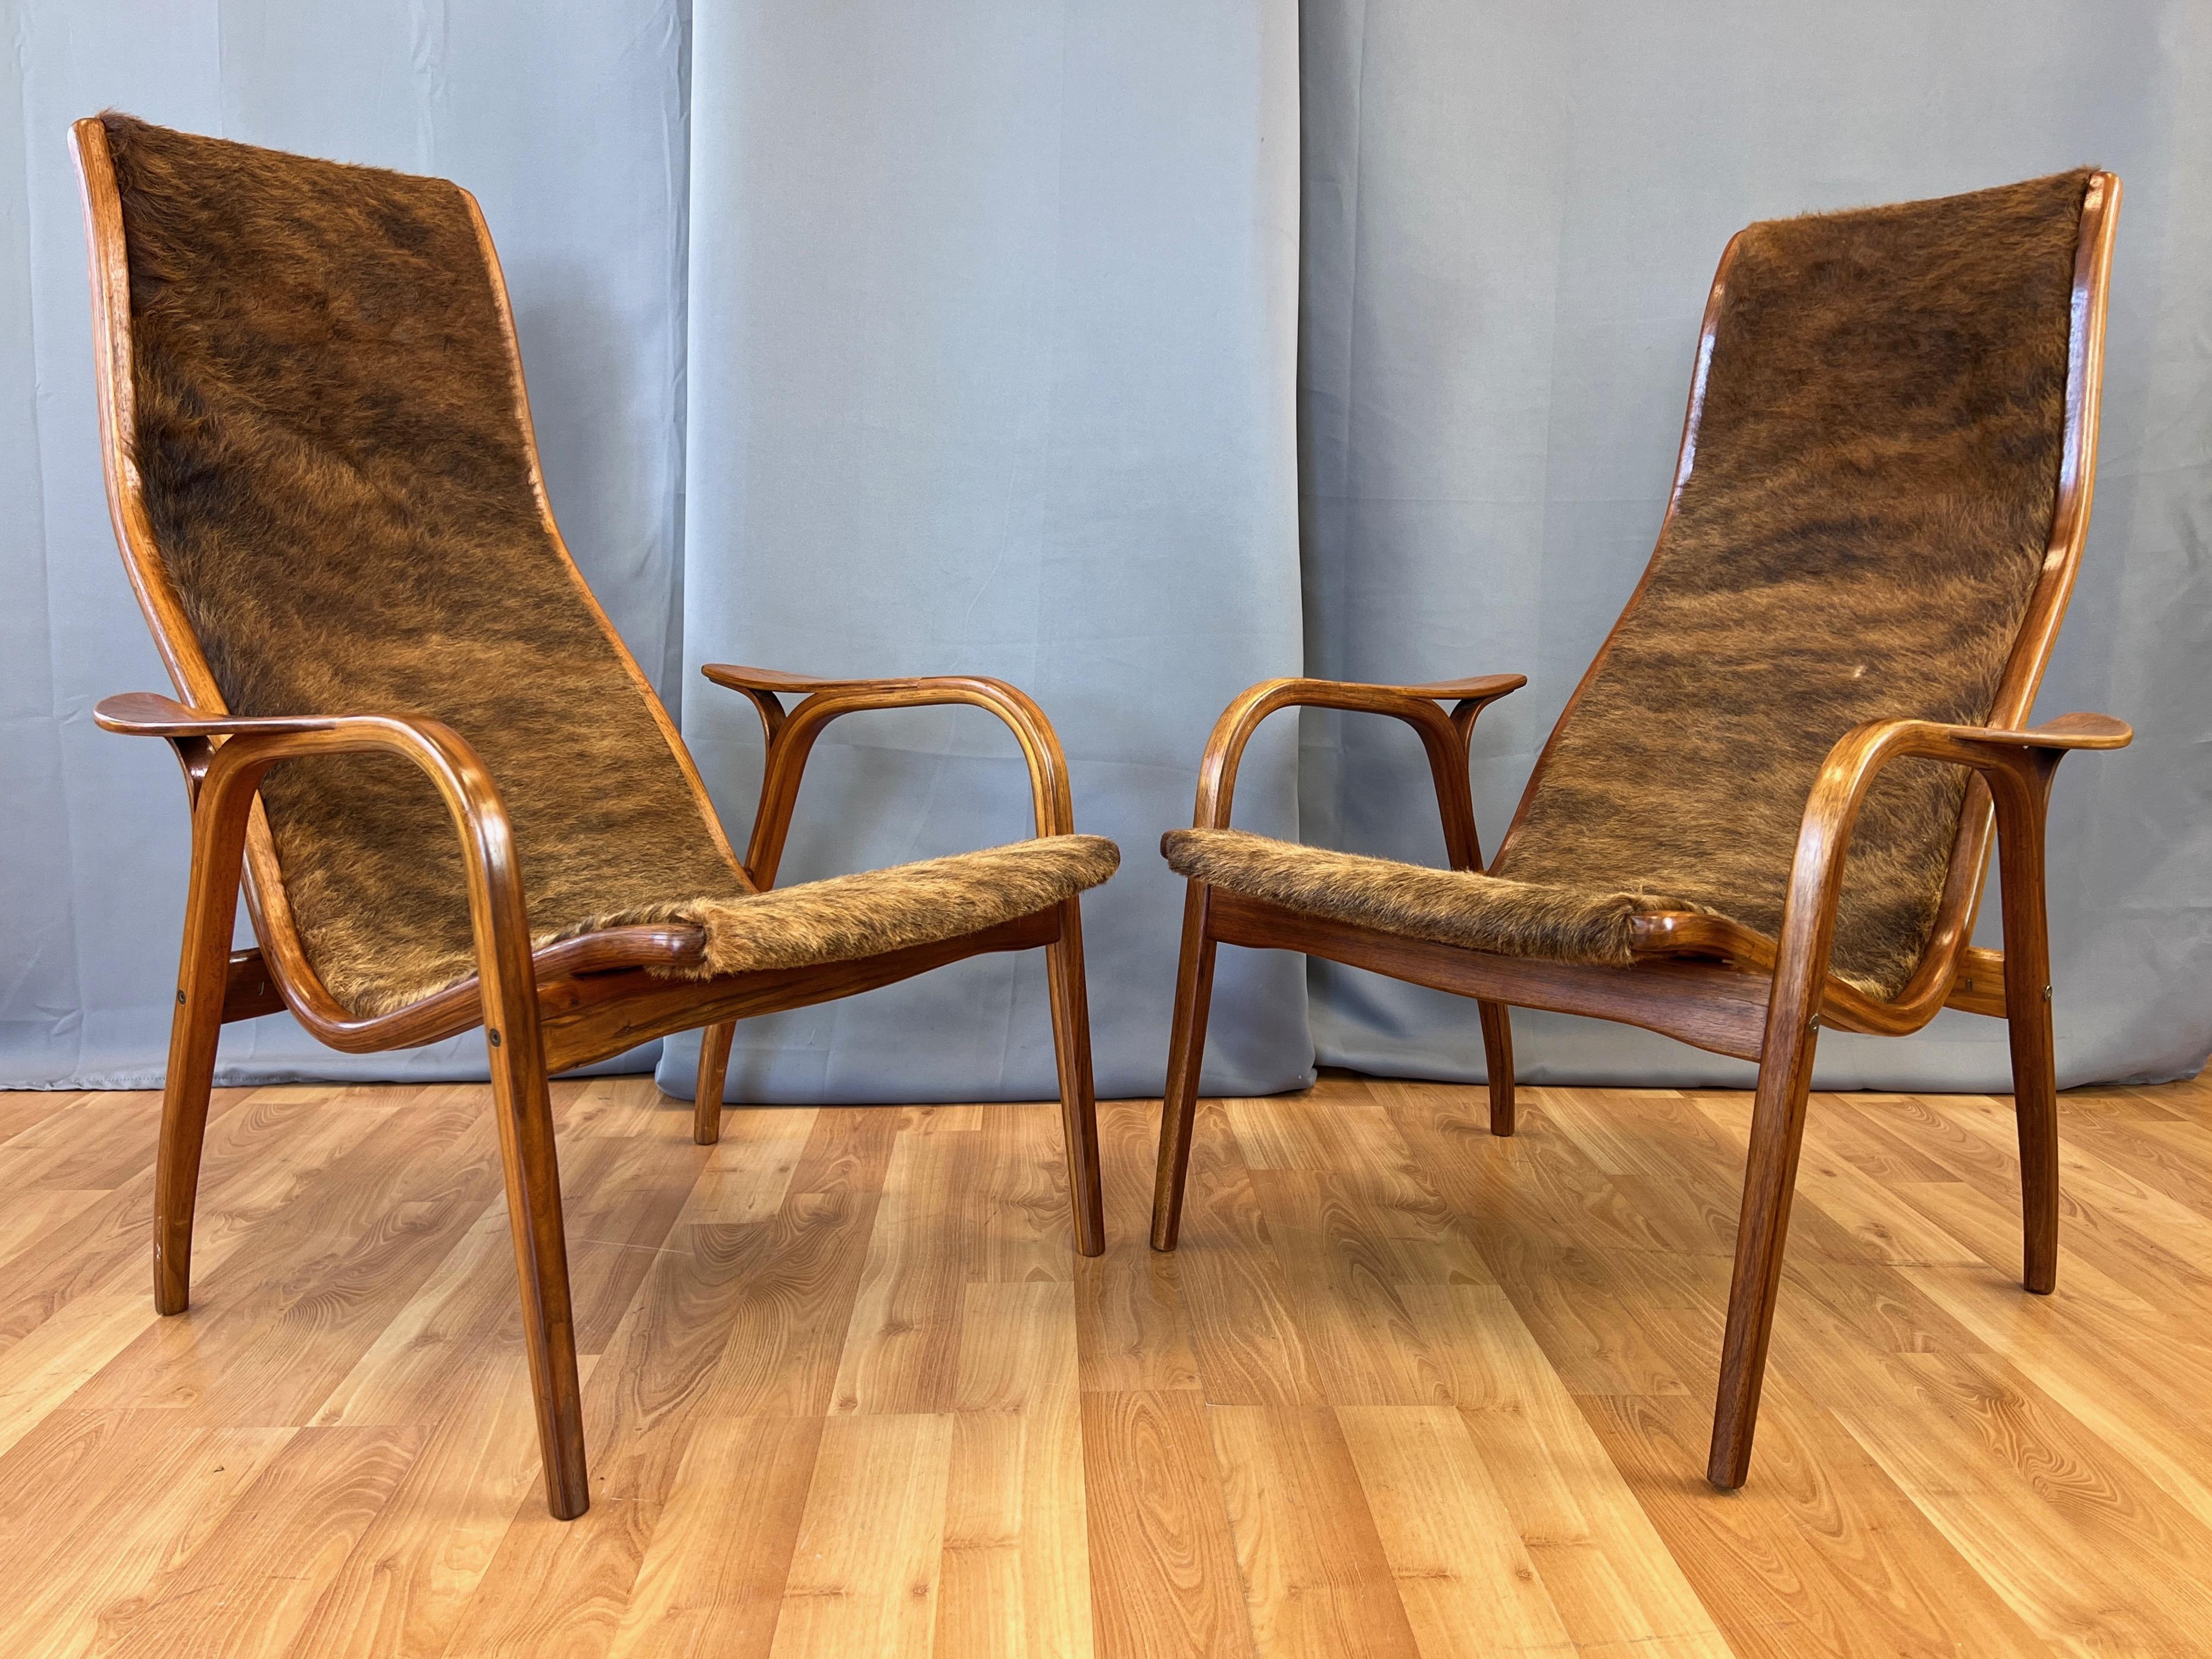 A pair of fantastic 1950s Yngve Ekström teak Lamino lounge chairs with cowhide upholstery for Swedese.

Striking handcrafted bentwood teak frames with a sinuous and sleek profile that commands attention. Recently reupholstered in vintage brindle